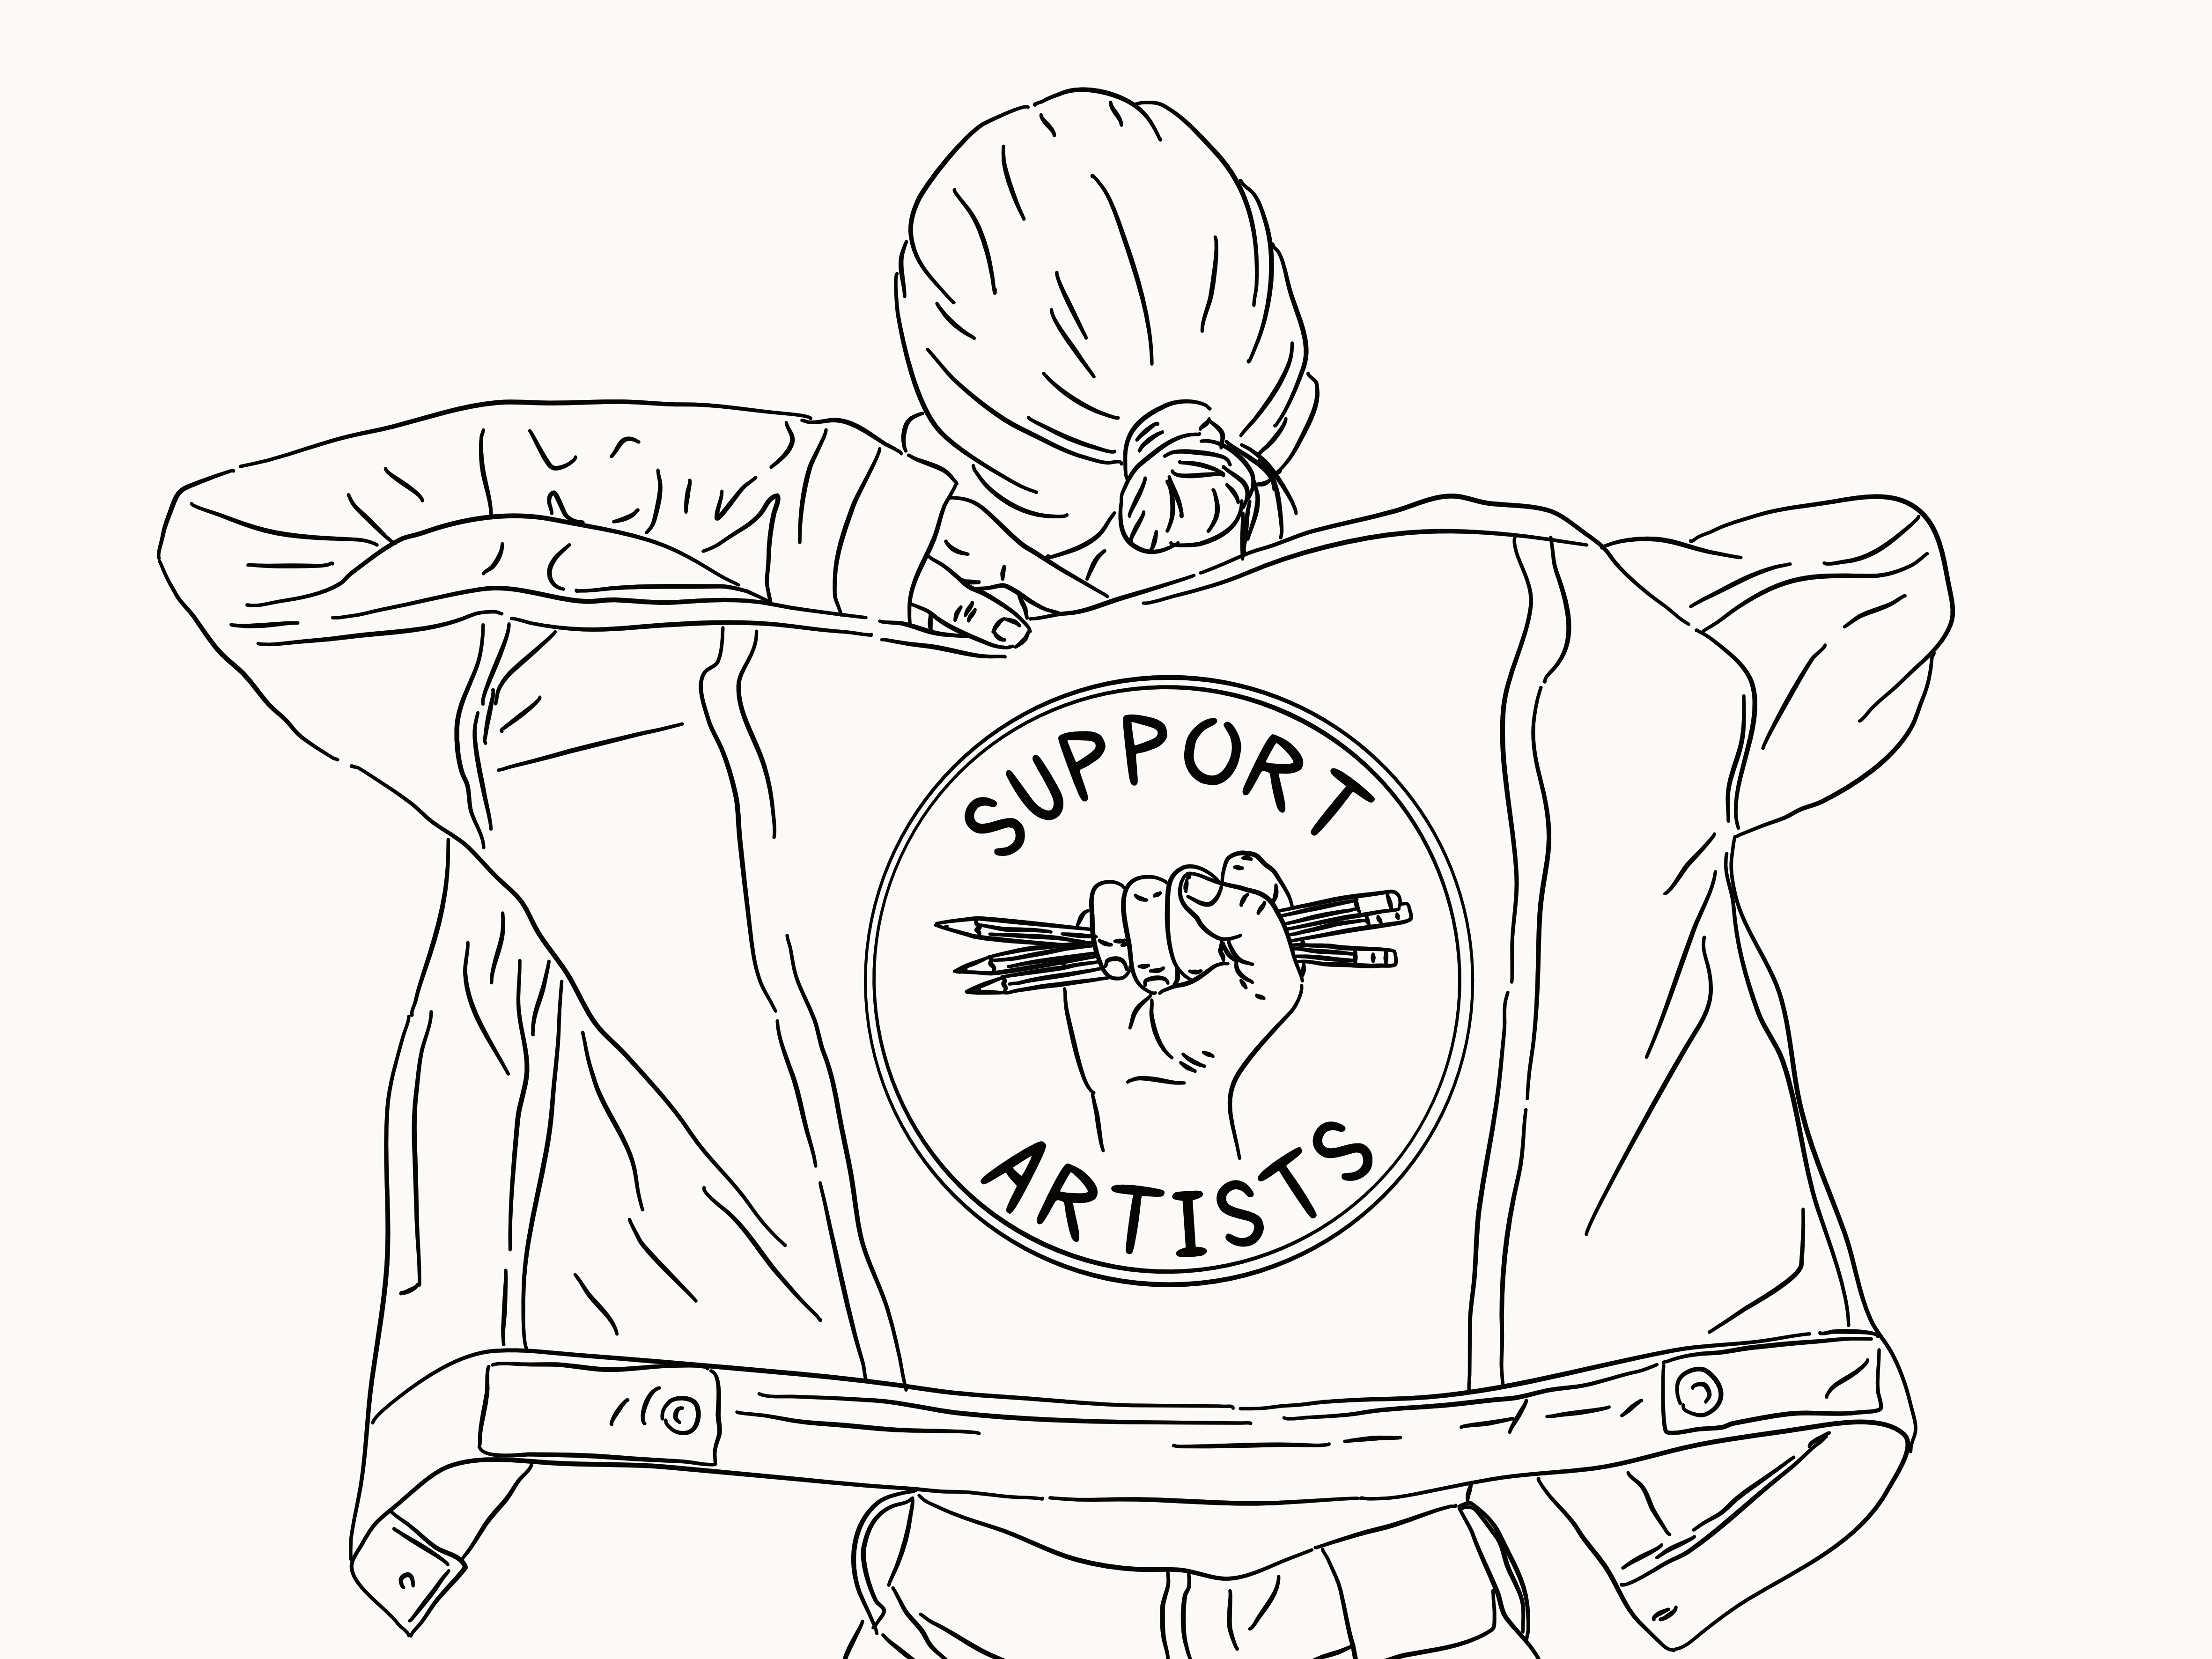 Support artists jacket